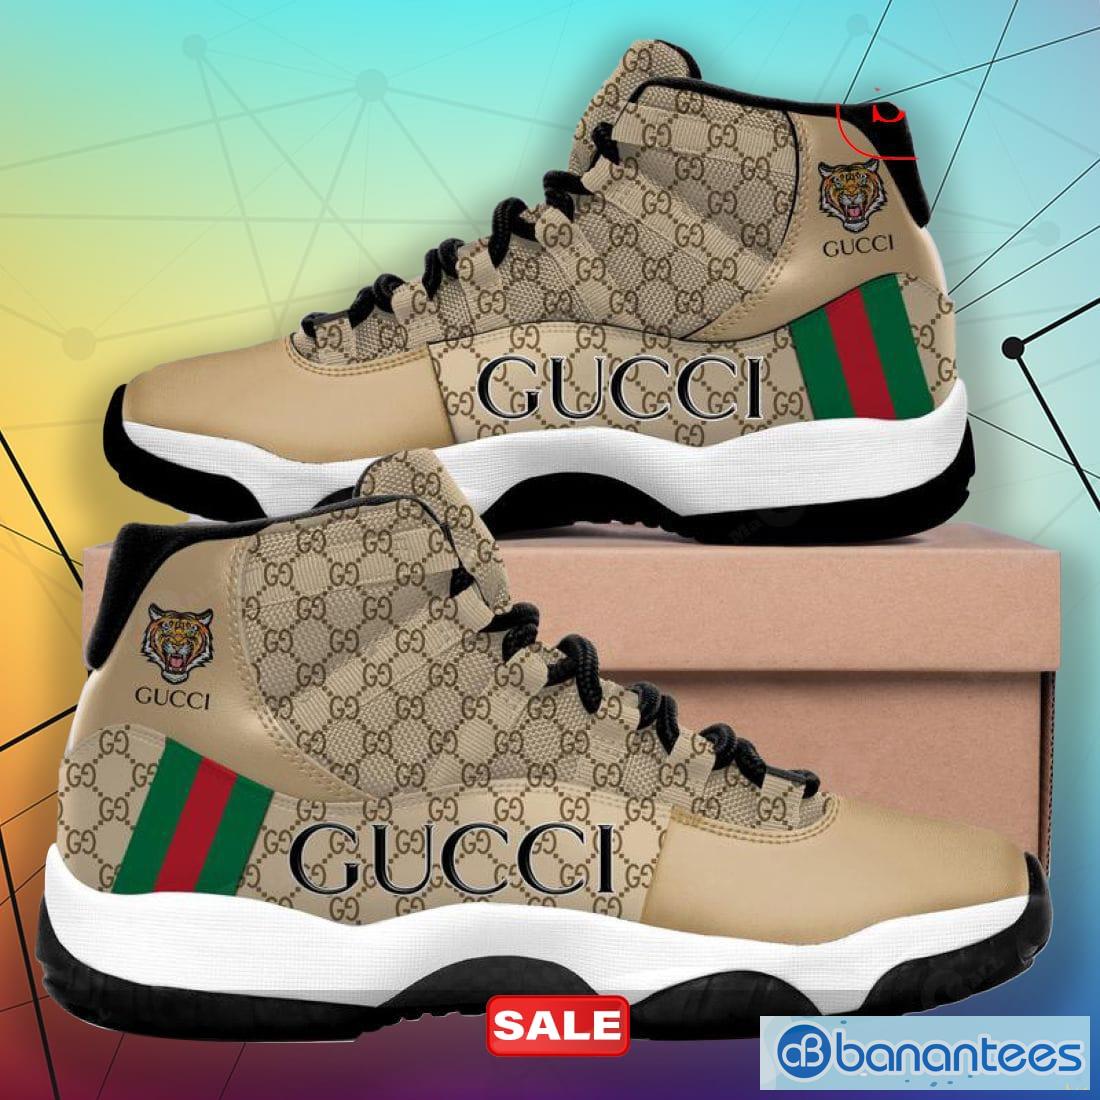 NEW FASHION] Gucci Brand Snake Air Jordan 11 Shoes Gucci Sneakers Gifts For  Men Women